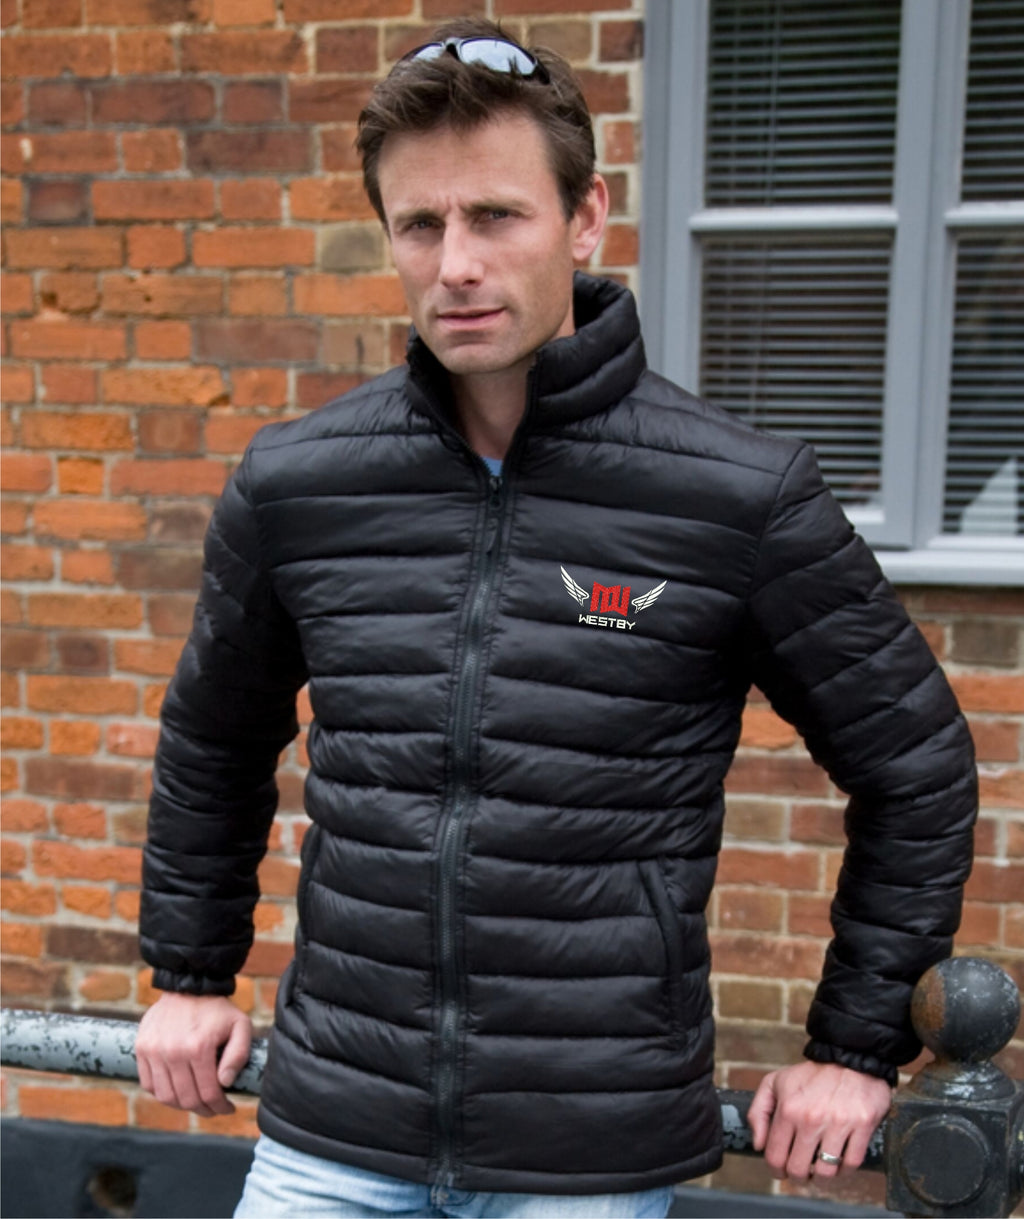 Michelle Westby Mens Ice Bird Padded Jacket